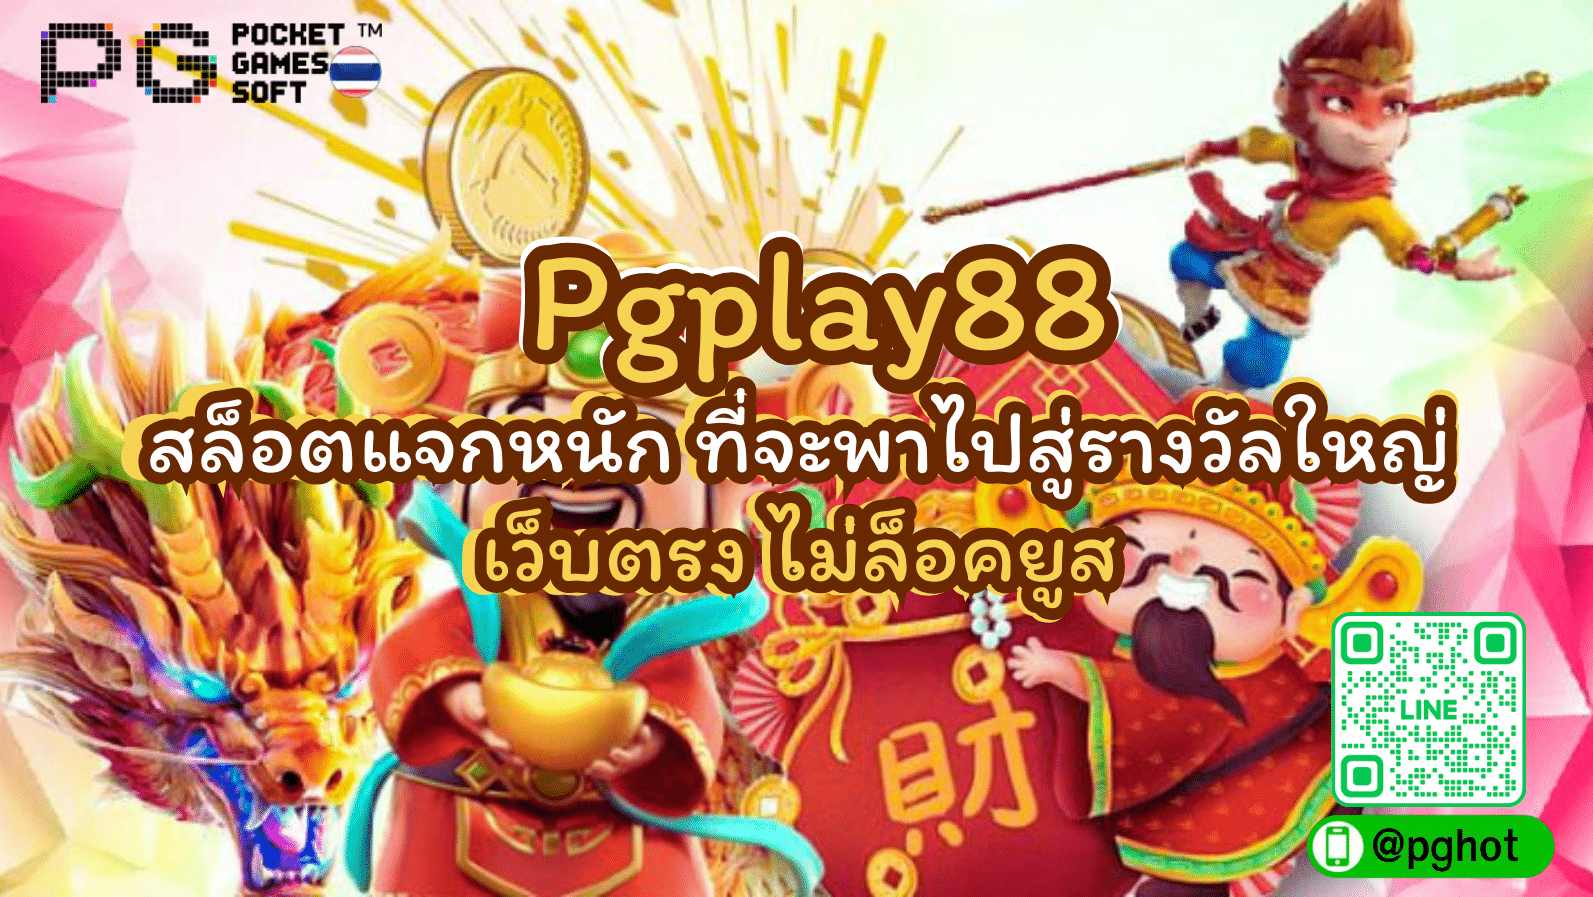 Pgplay88